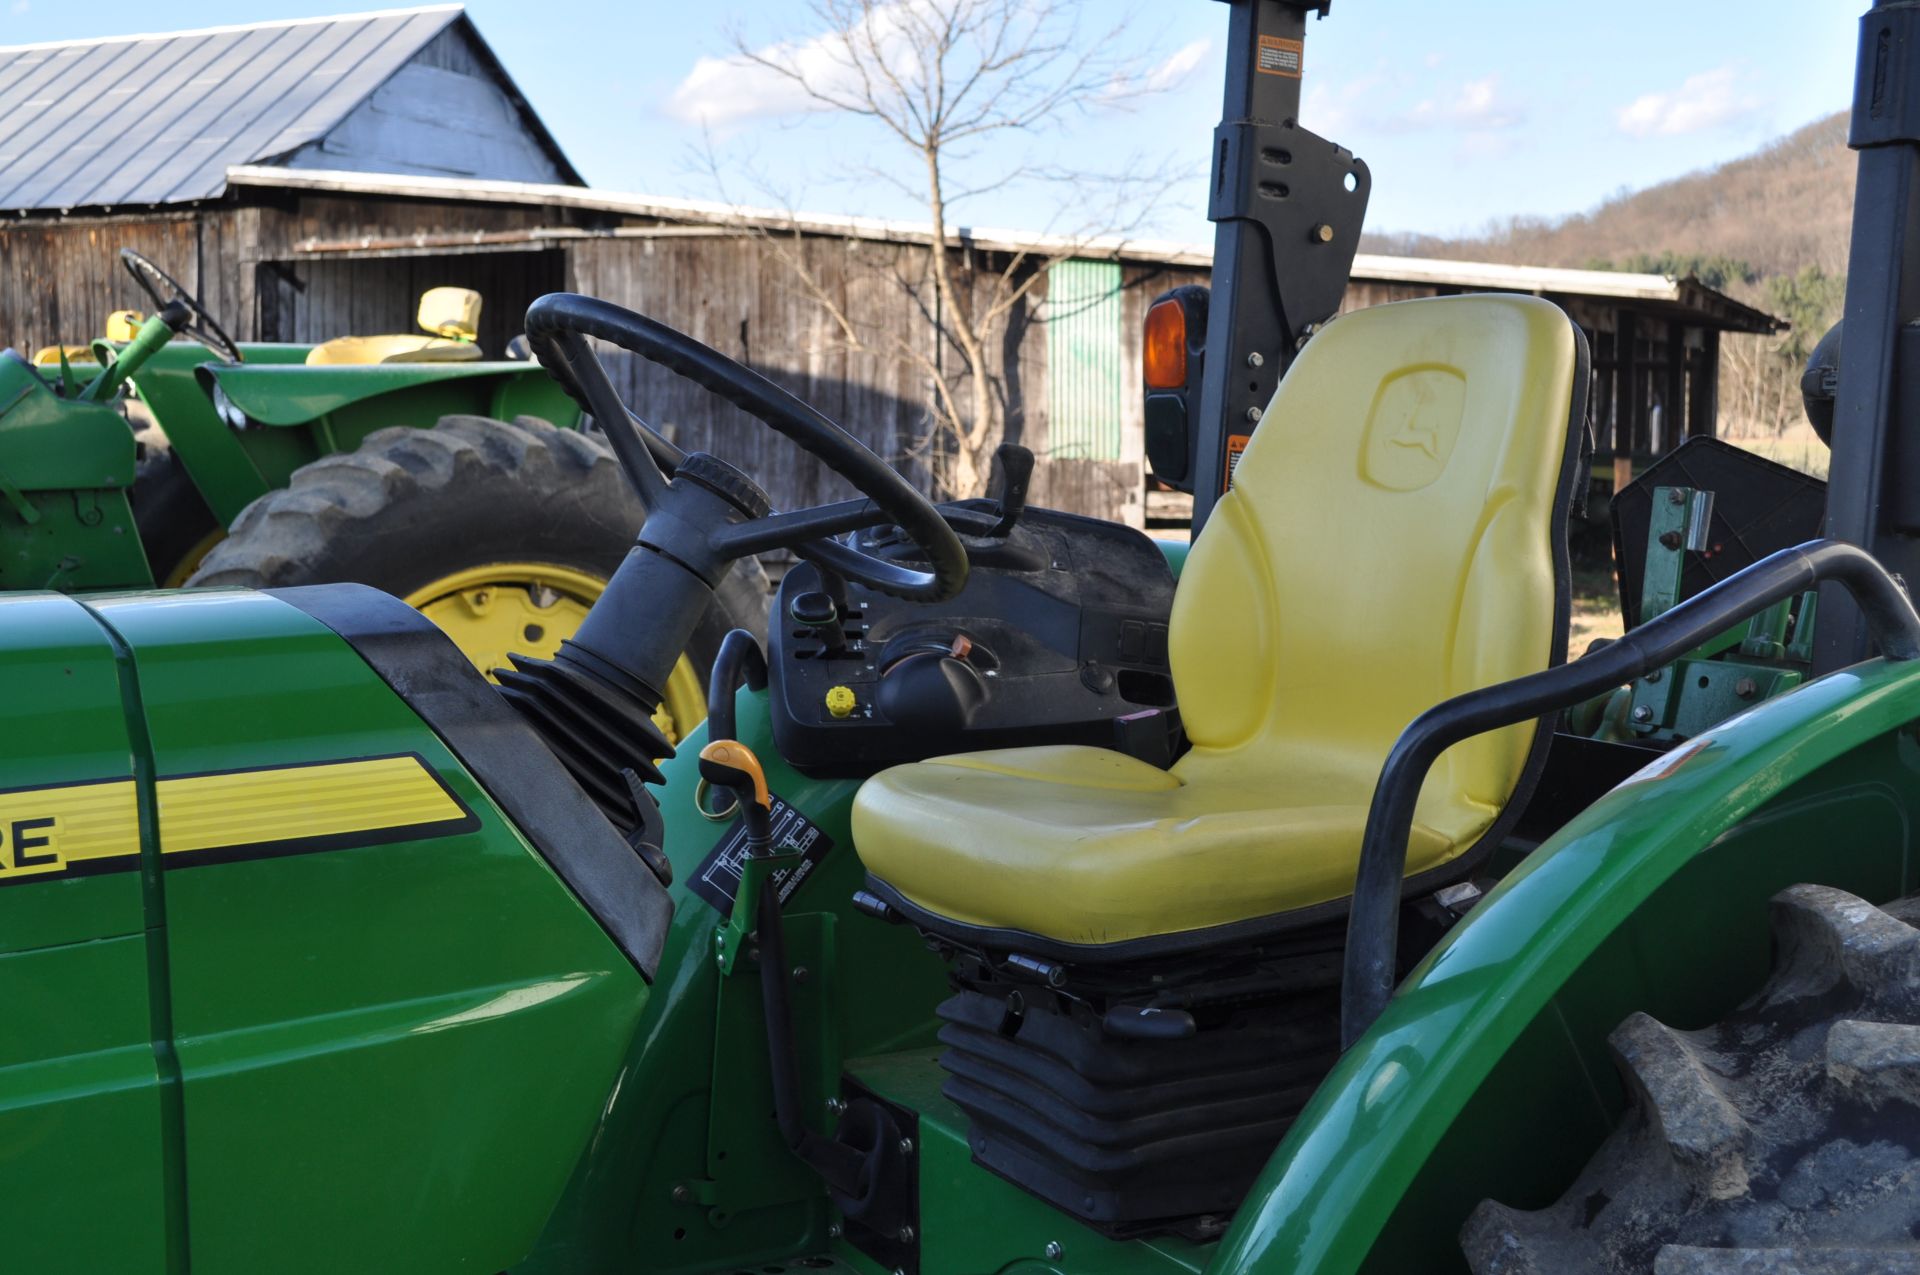 John Deere 5075M tractor, 16.9-30 rear, 11L-15 front, 2 hyd remotes, 3 pt, 540 PTO, Diesel - Image 15 of 24